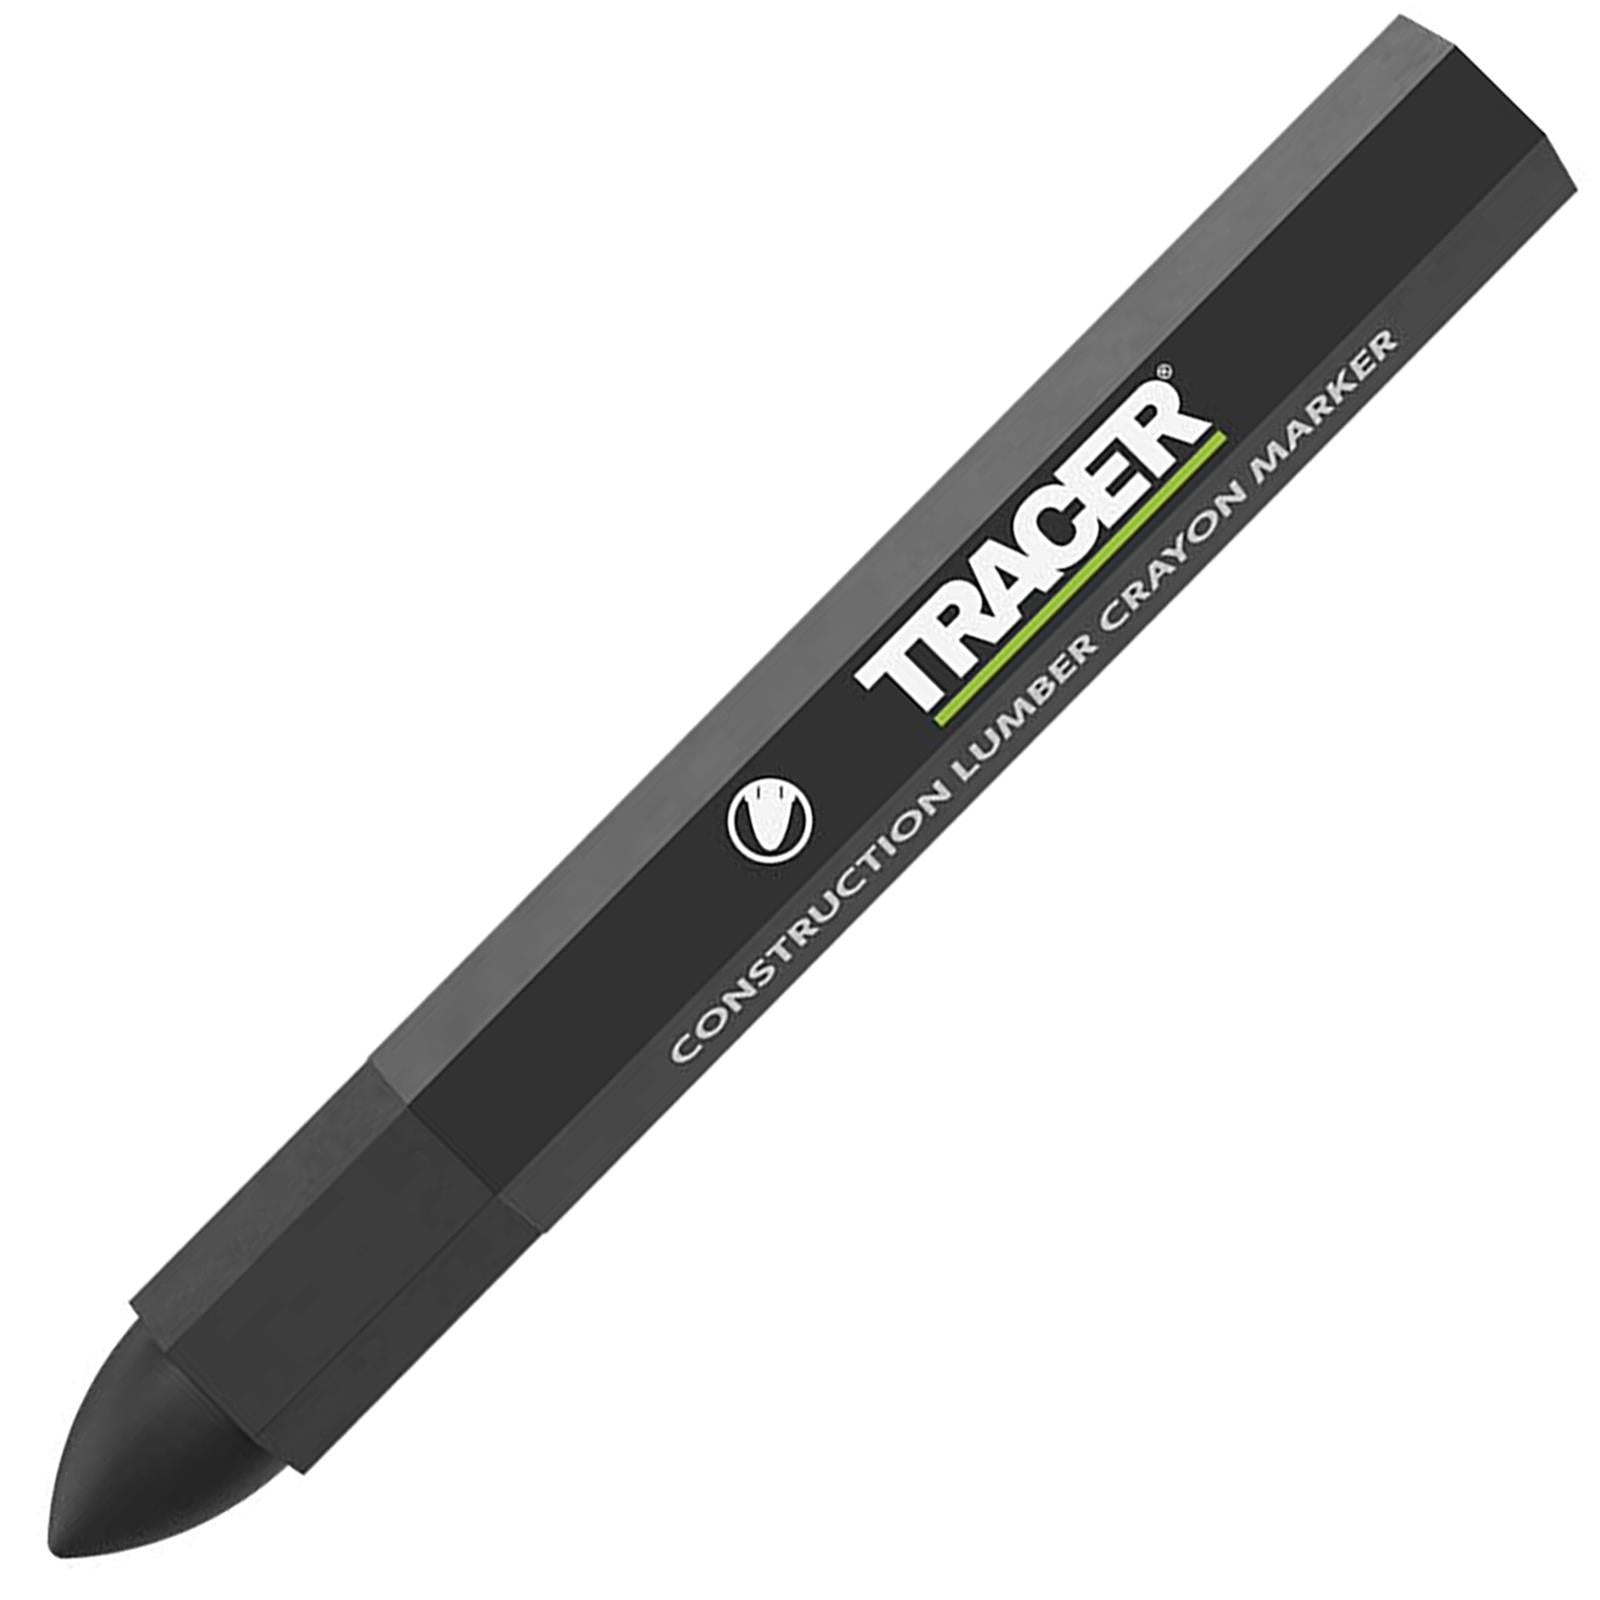 Tracer Apmk1 Permanent Construction Markers Pack Of 4